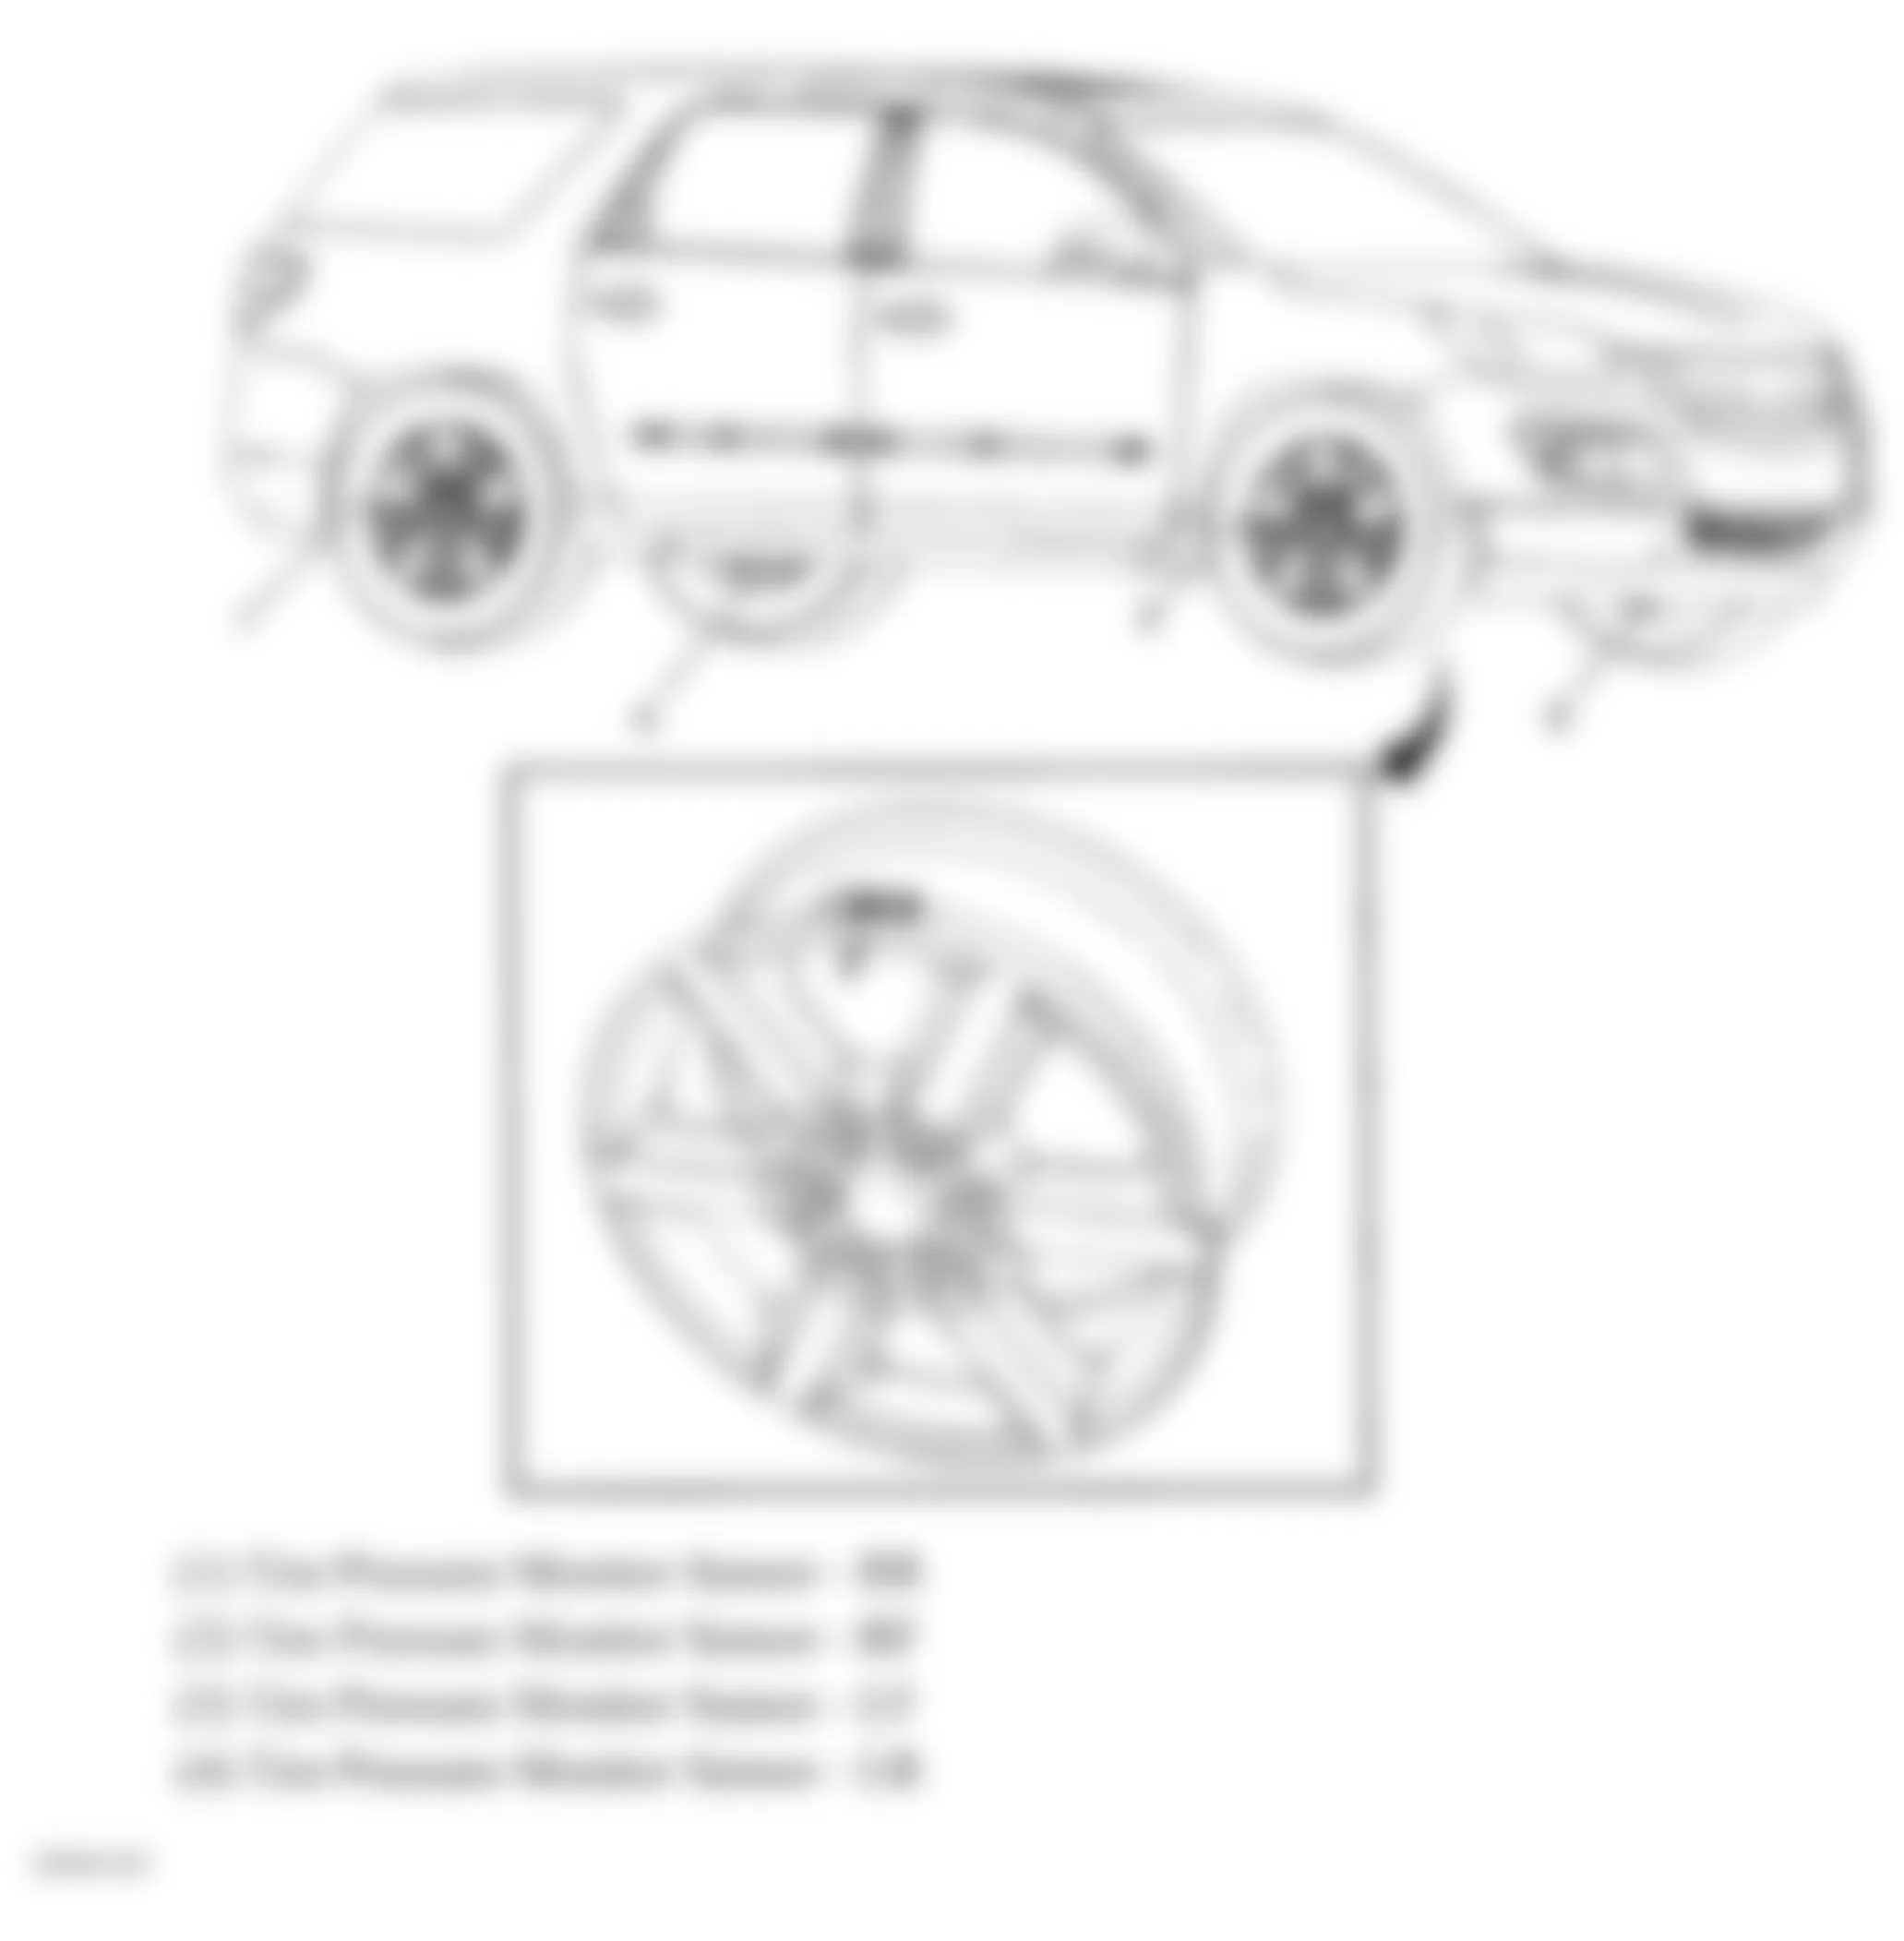 GMC Acadia SL 2010 - Component Locations -  Vehicle Tire Overview